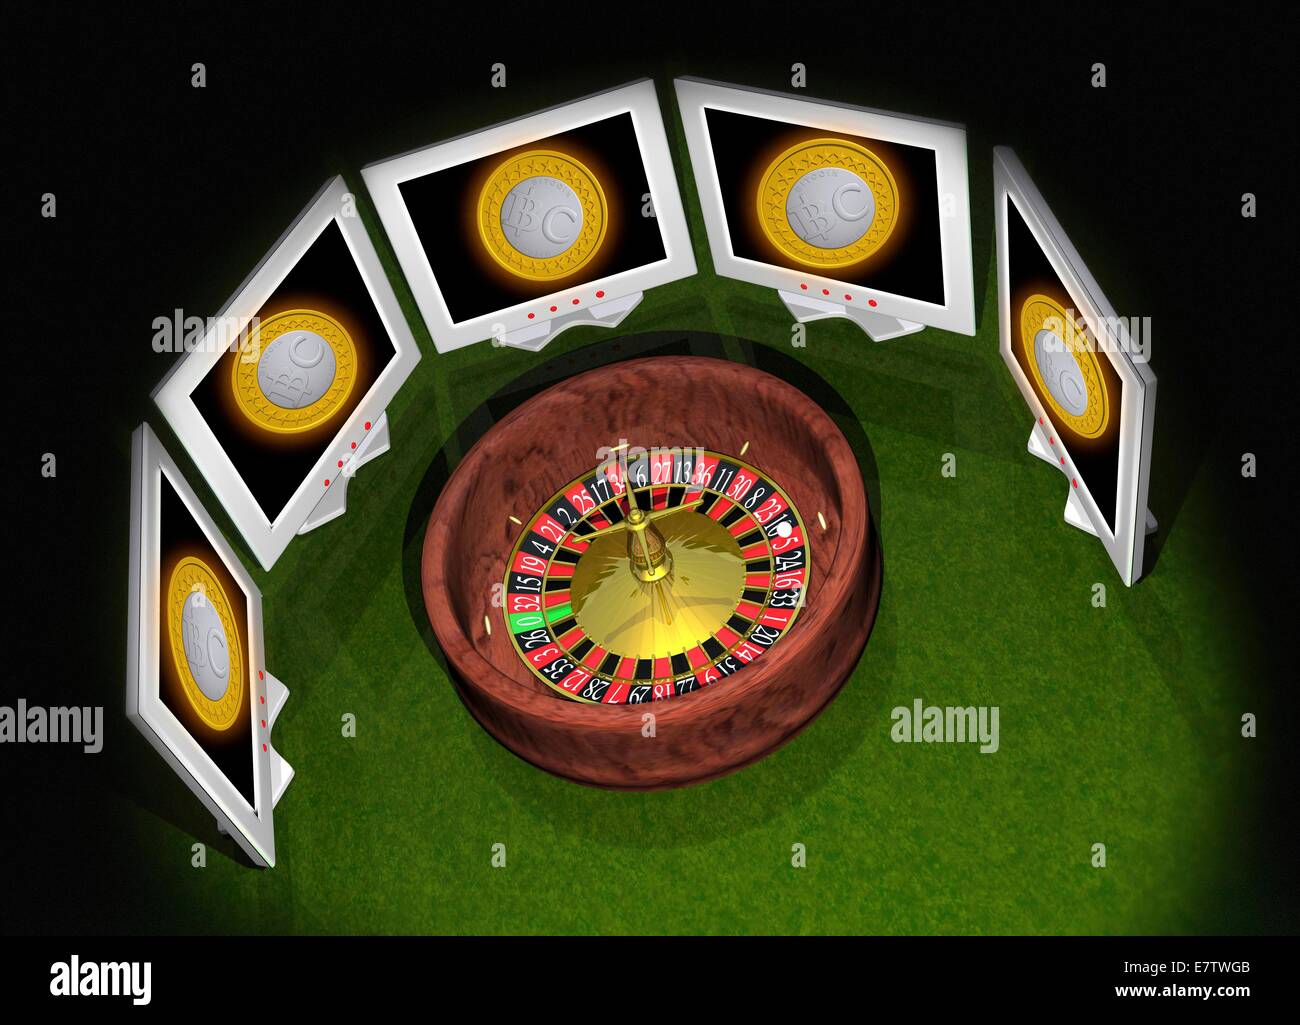 Roulette wheel and bitcoins, computer artwork. Stock Photo